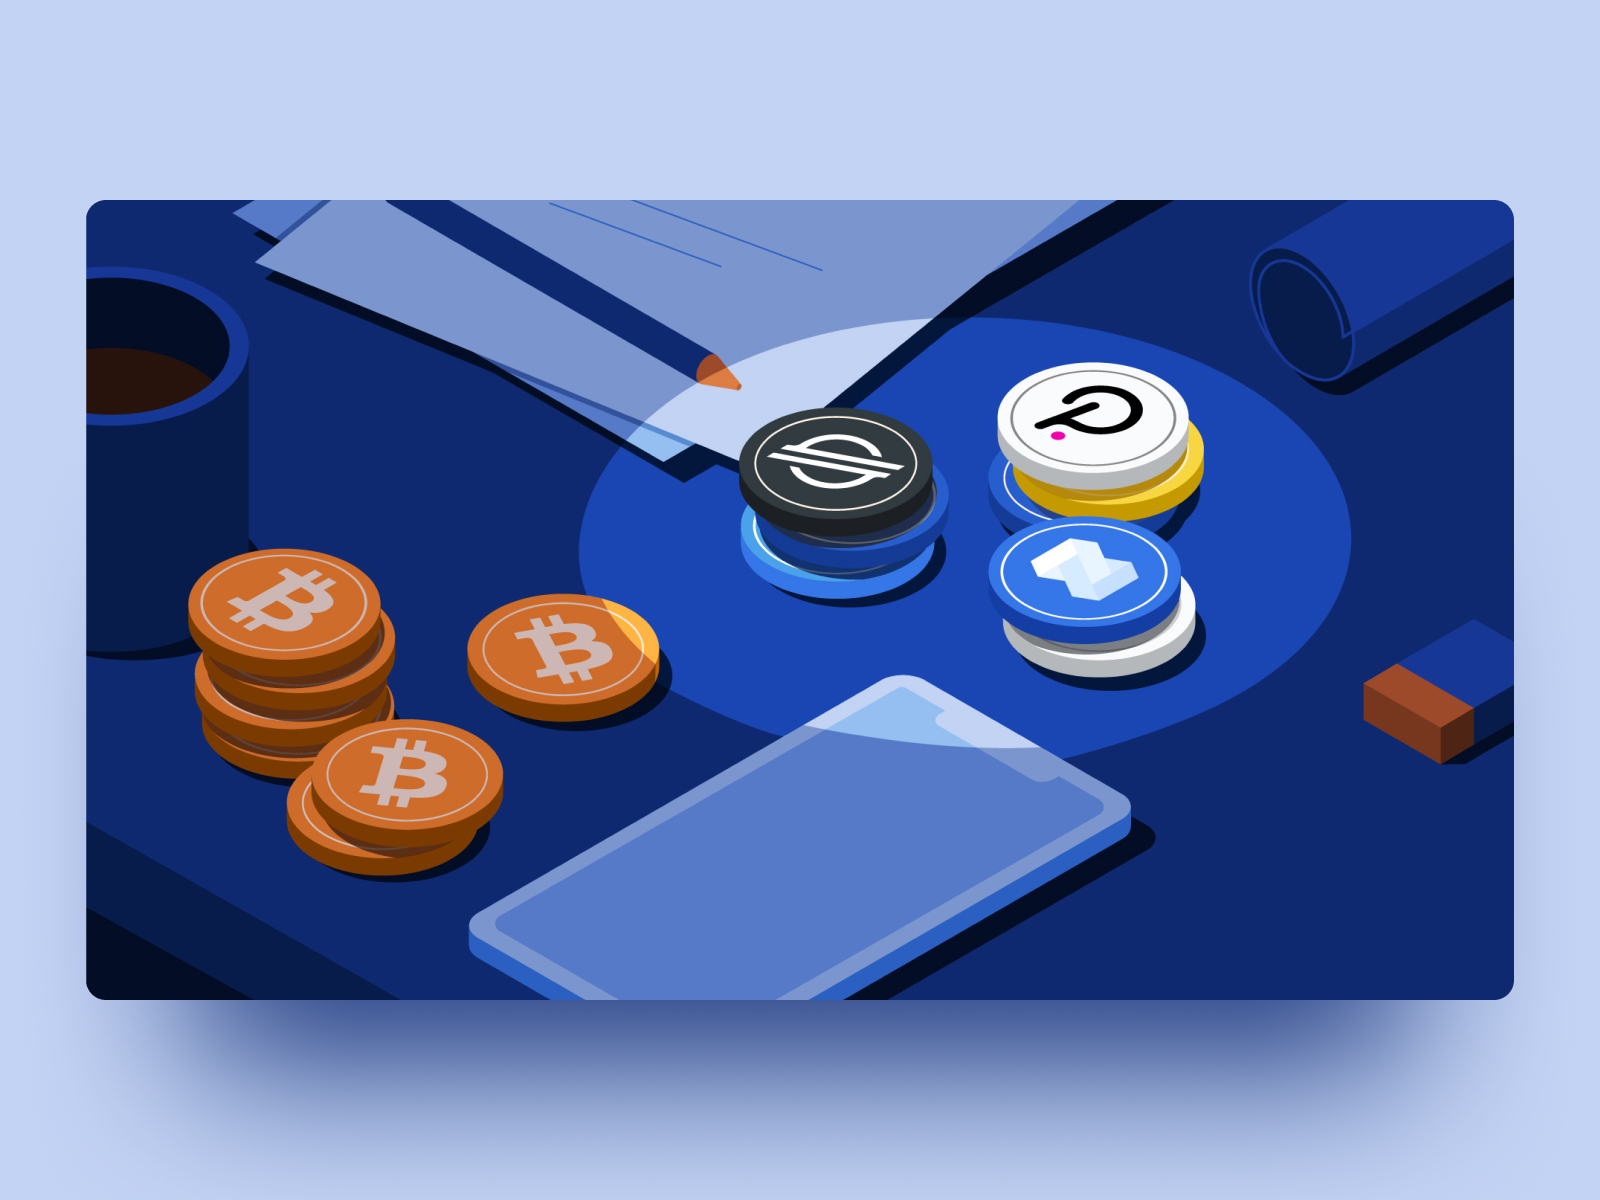 Dispatch - Alts assets banking bitcoin coins crypto crypto wallet cryptocoin cryptocurrency digital assets fintech flat design flat illustration graphic design illustration illustrator isometric isometry nexo spotlight vector